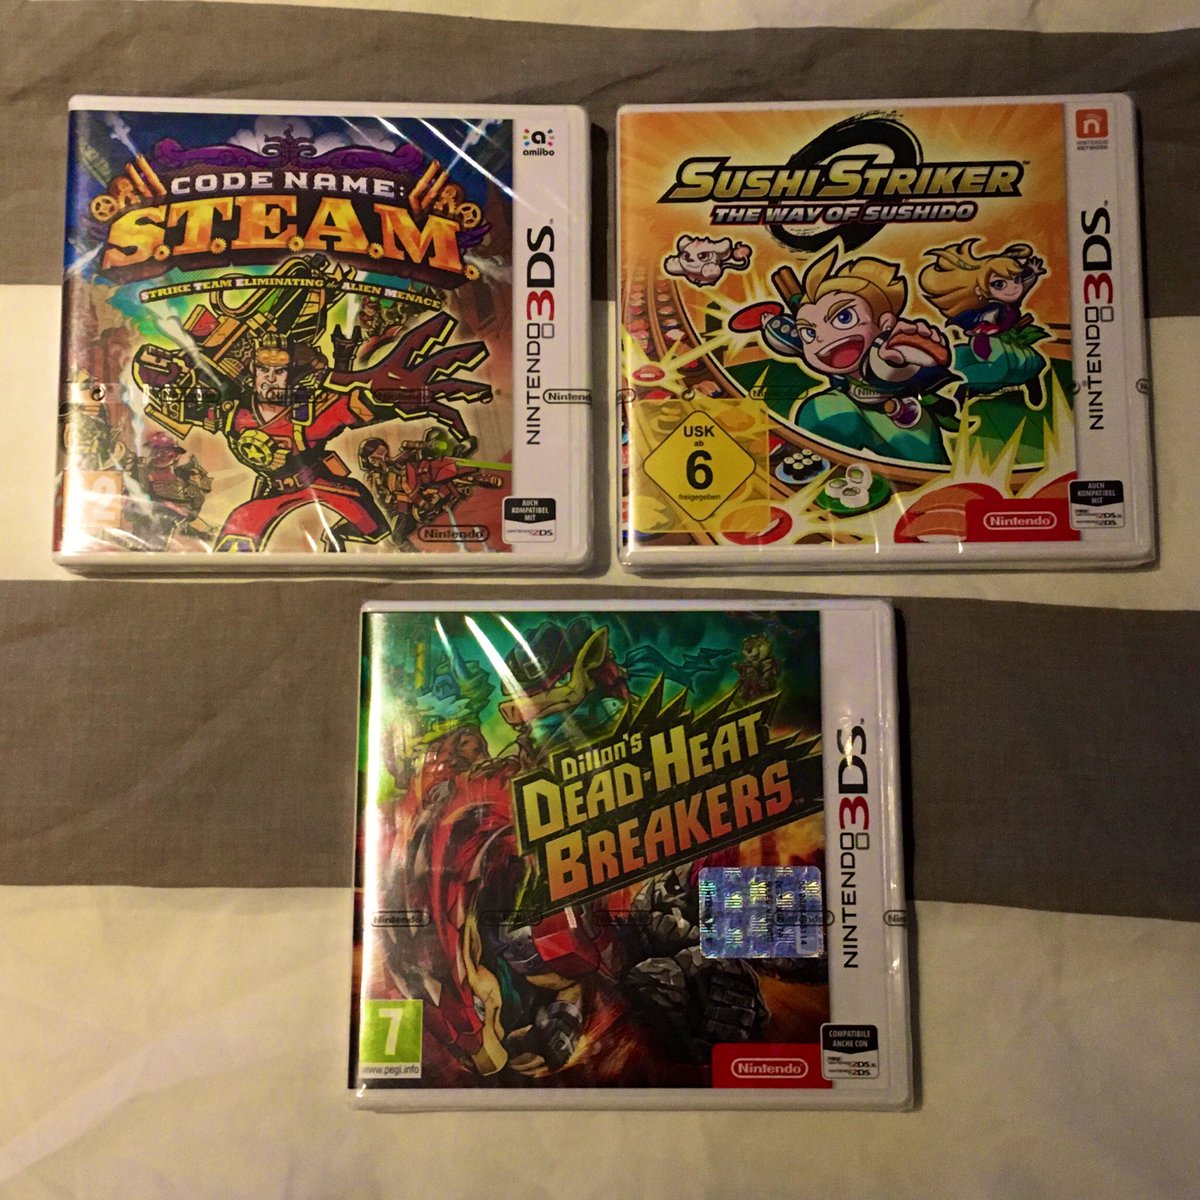 on Twitter: "Christmas present to myself: Some 3DS hidden-gems for dirt-cheap. Codename Steam, Sushi Striker and Dillan's Dead-Heat Breakers. Gotta get them before the prices for this console increases https://t.co/m0JzHEqp3a"